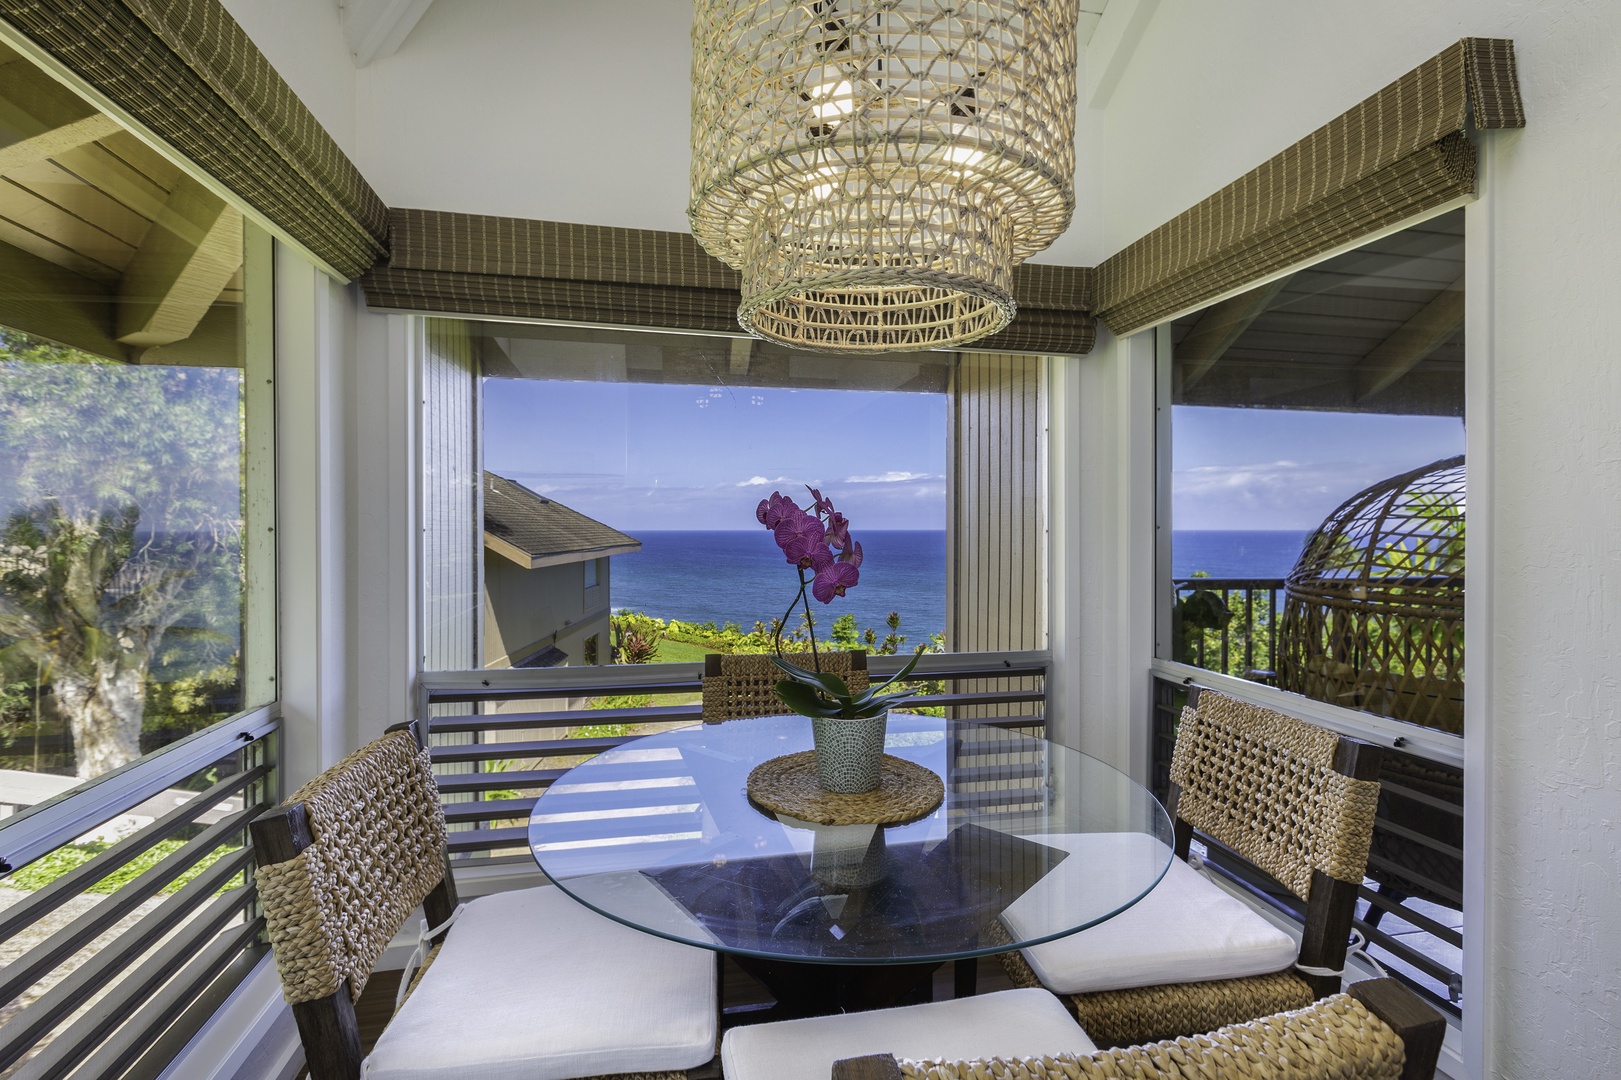 Princeville Vacation Rentals, Pali Ke Kua 207 - If you prefer to eat indoors but can’t bear to part with the view, the dining room, surrounded by windows, allows you to take full advantage of the ocean view beyond.